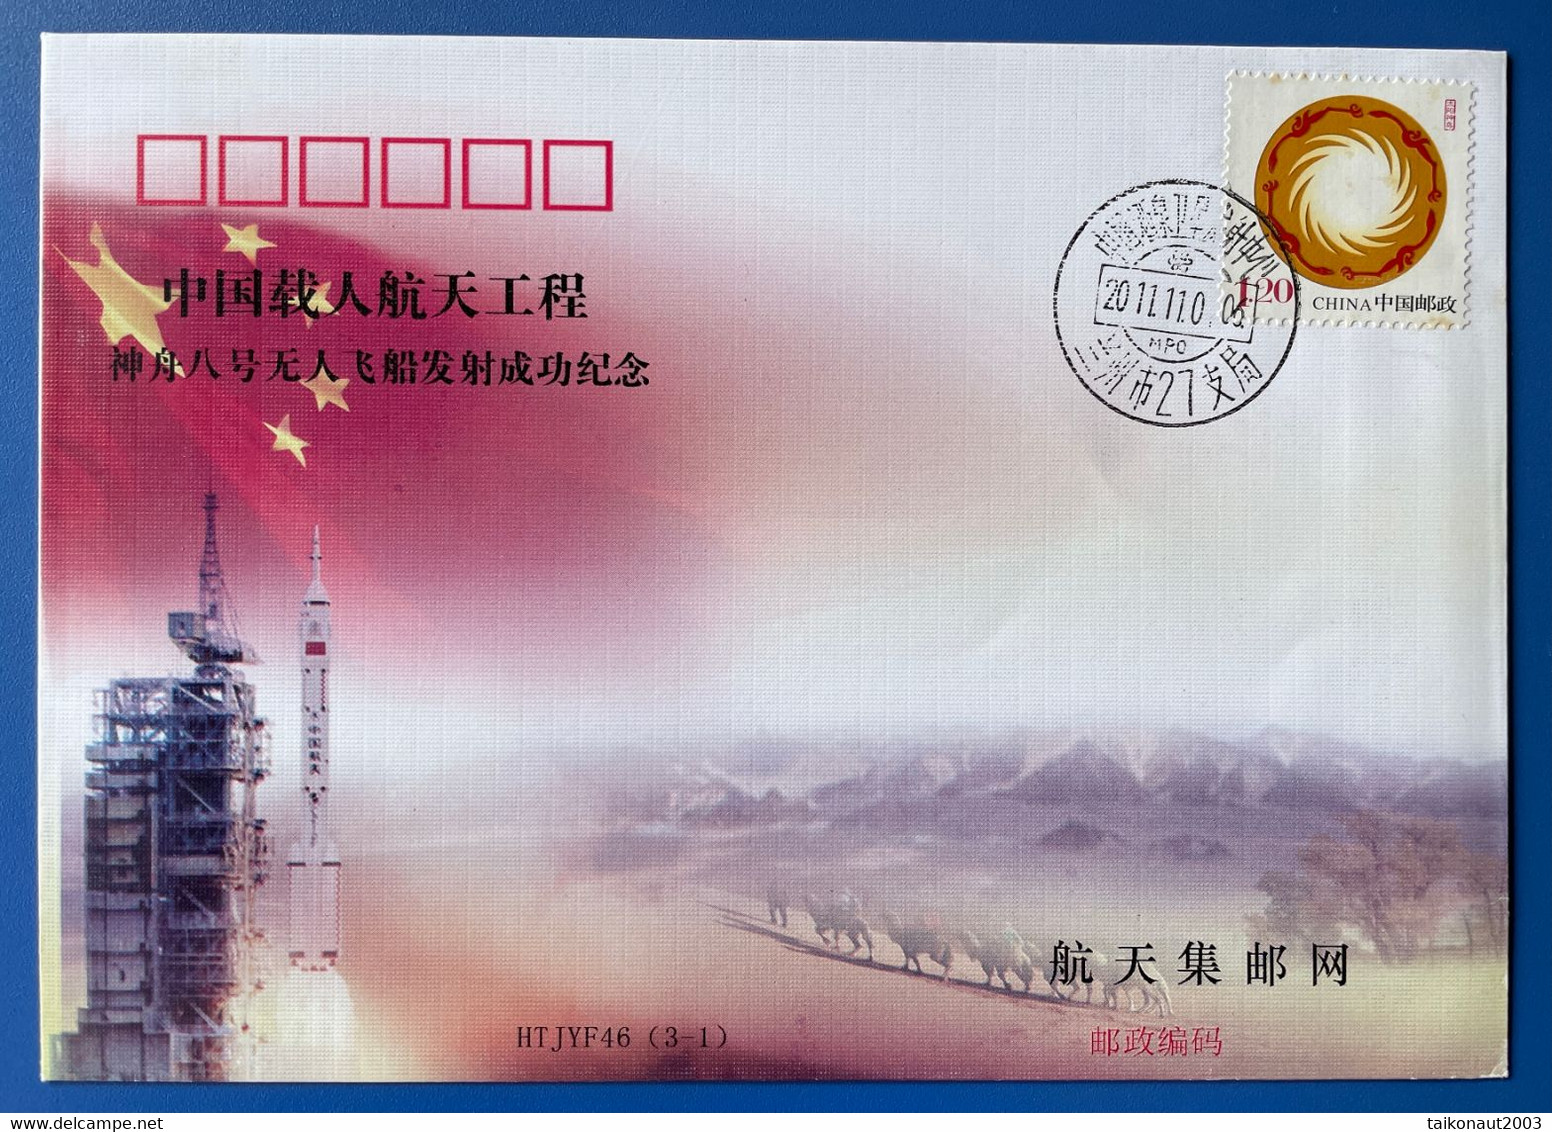 China Space 2011 LM-2F Y8 Rocket Launch Shenzhou-8 Spaceship Cover - Asia